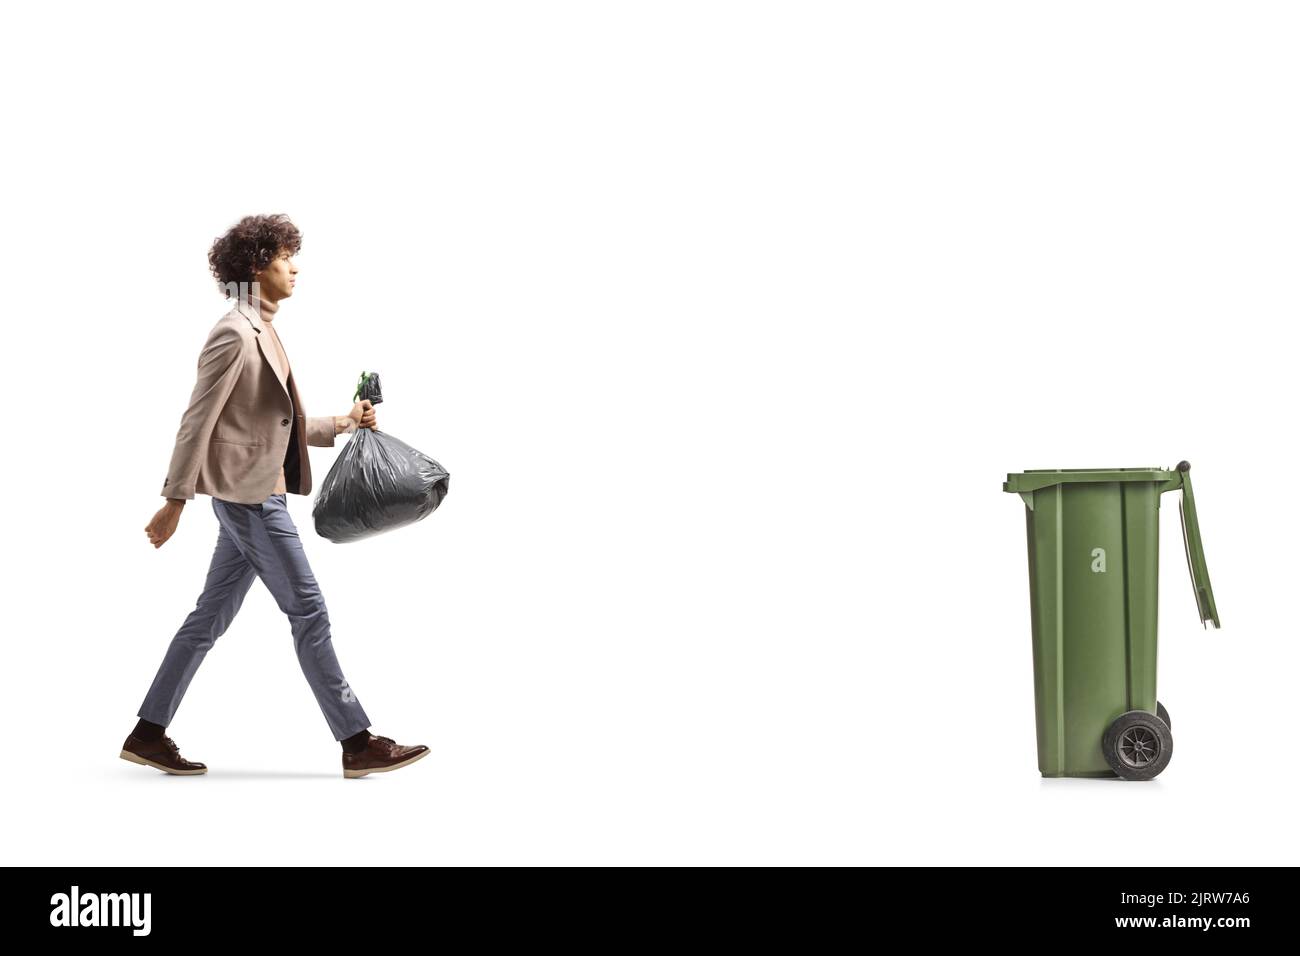 https://c8.alamy.com/comp/2JRW7A6/full-length-profile-shot-of-a-tall-young-man-walking-towards-a-bin-and-carrying-a-plastic-bag-isolated-on-white-background-2JRW7A6.jpg